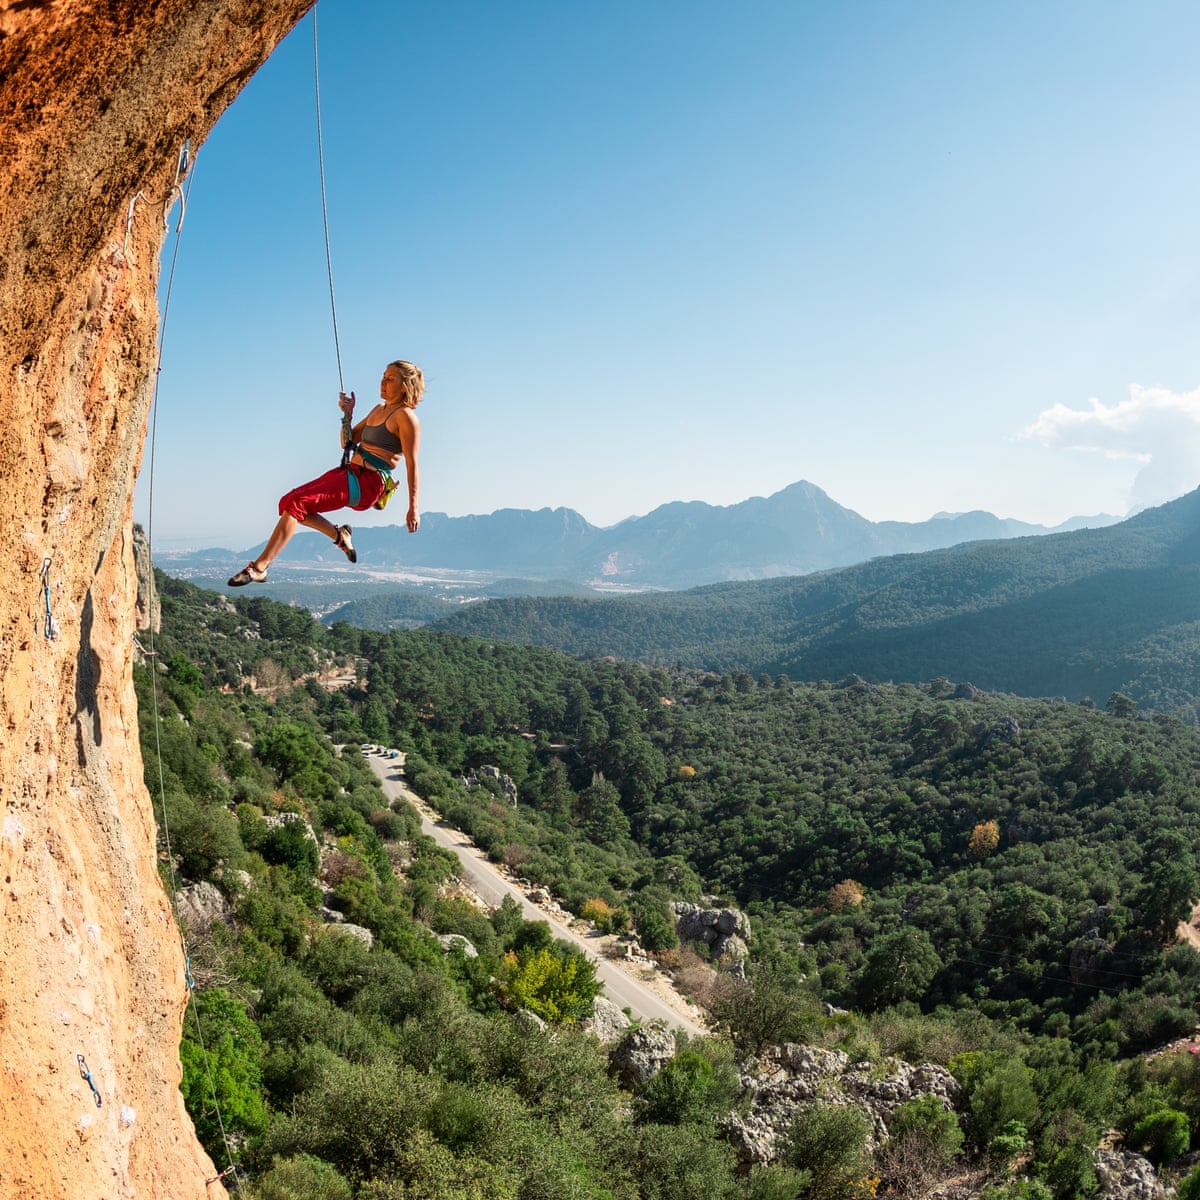 Rock climbers like to connect with nature – but are they also destroying  it?, Environment